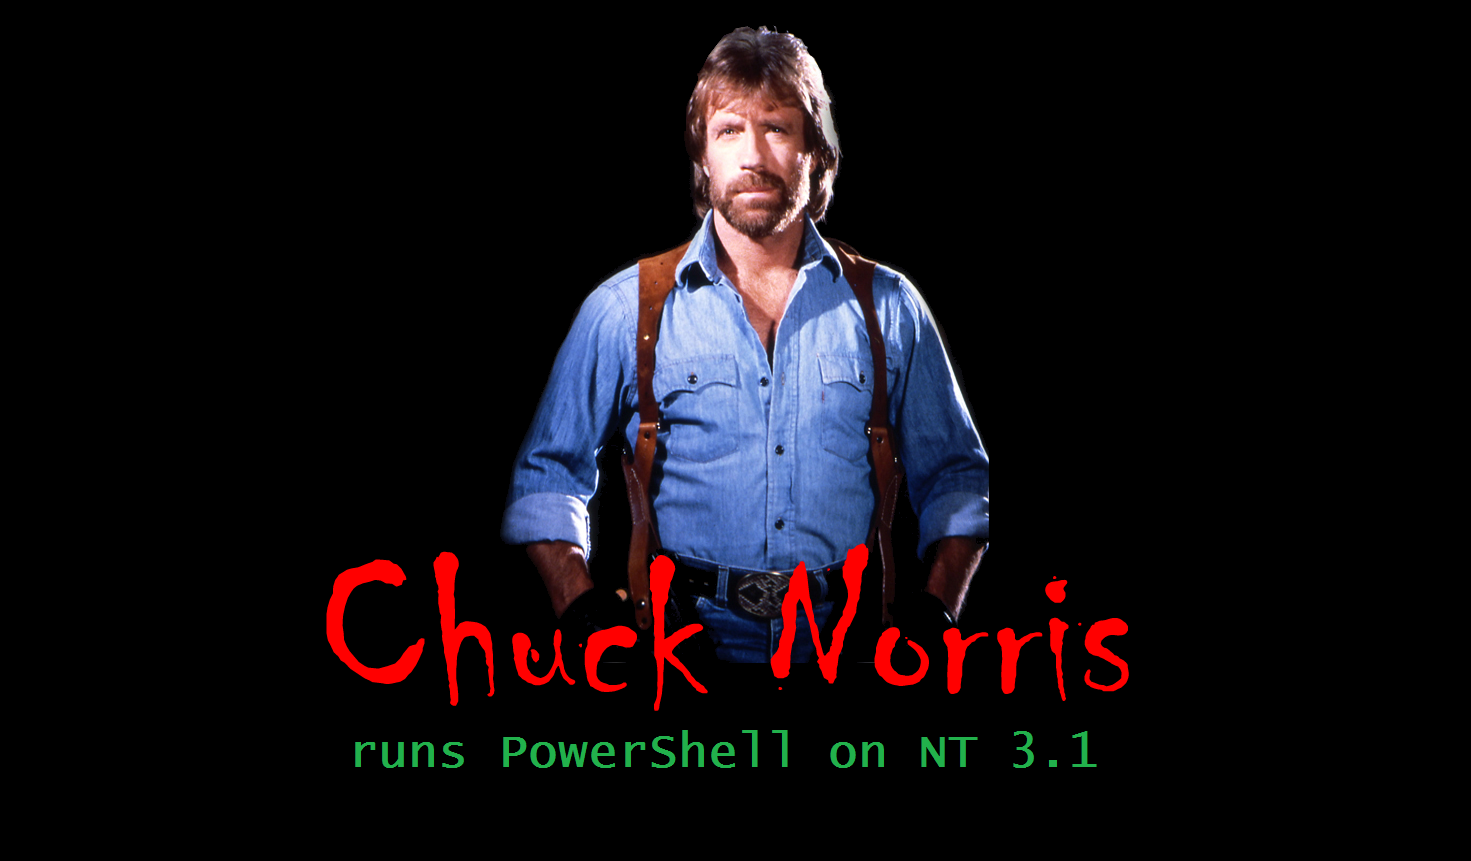 Chuck Norris Wallpaper Top Collections Of Pictures Image